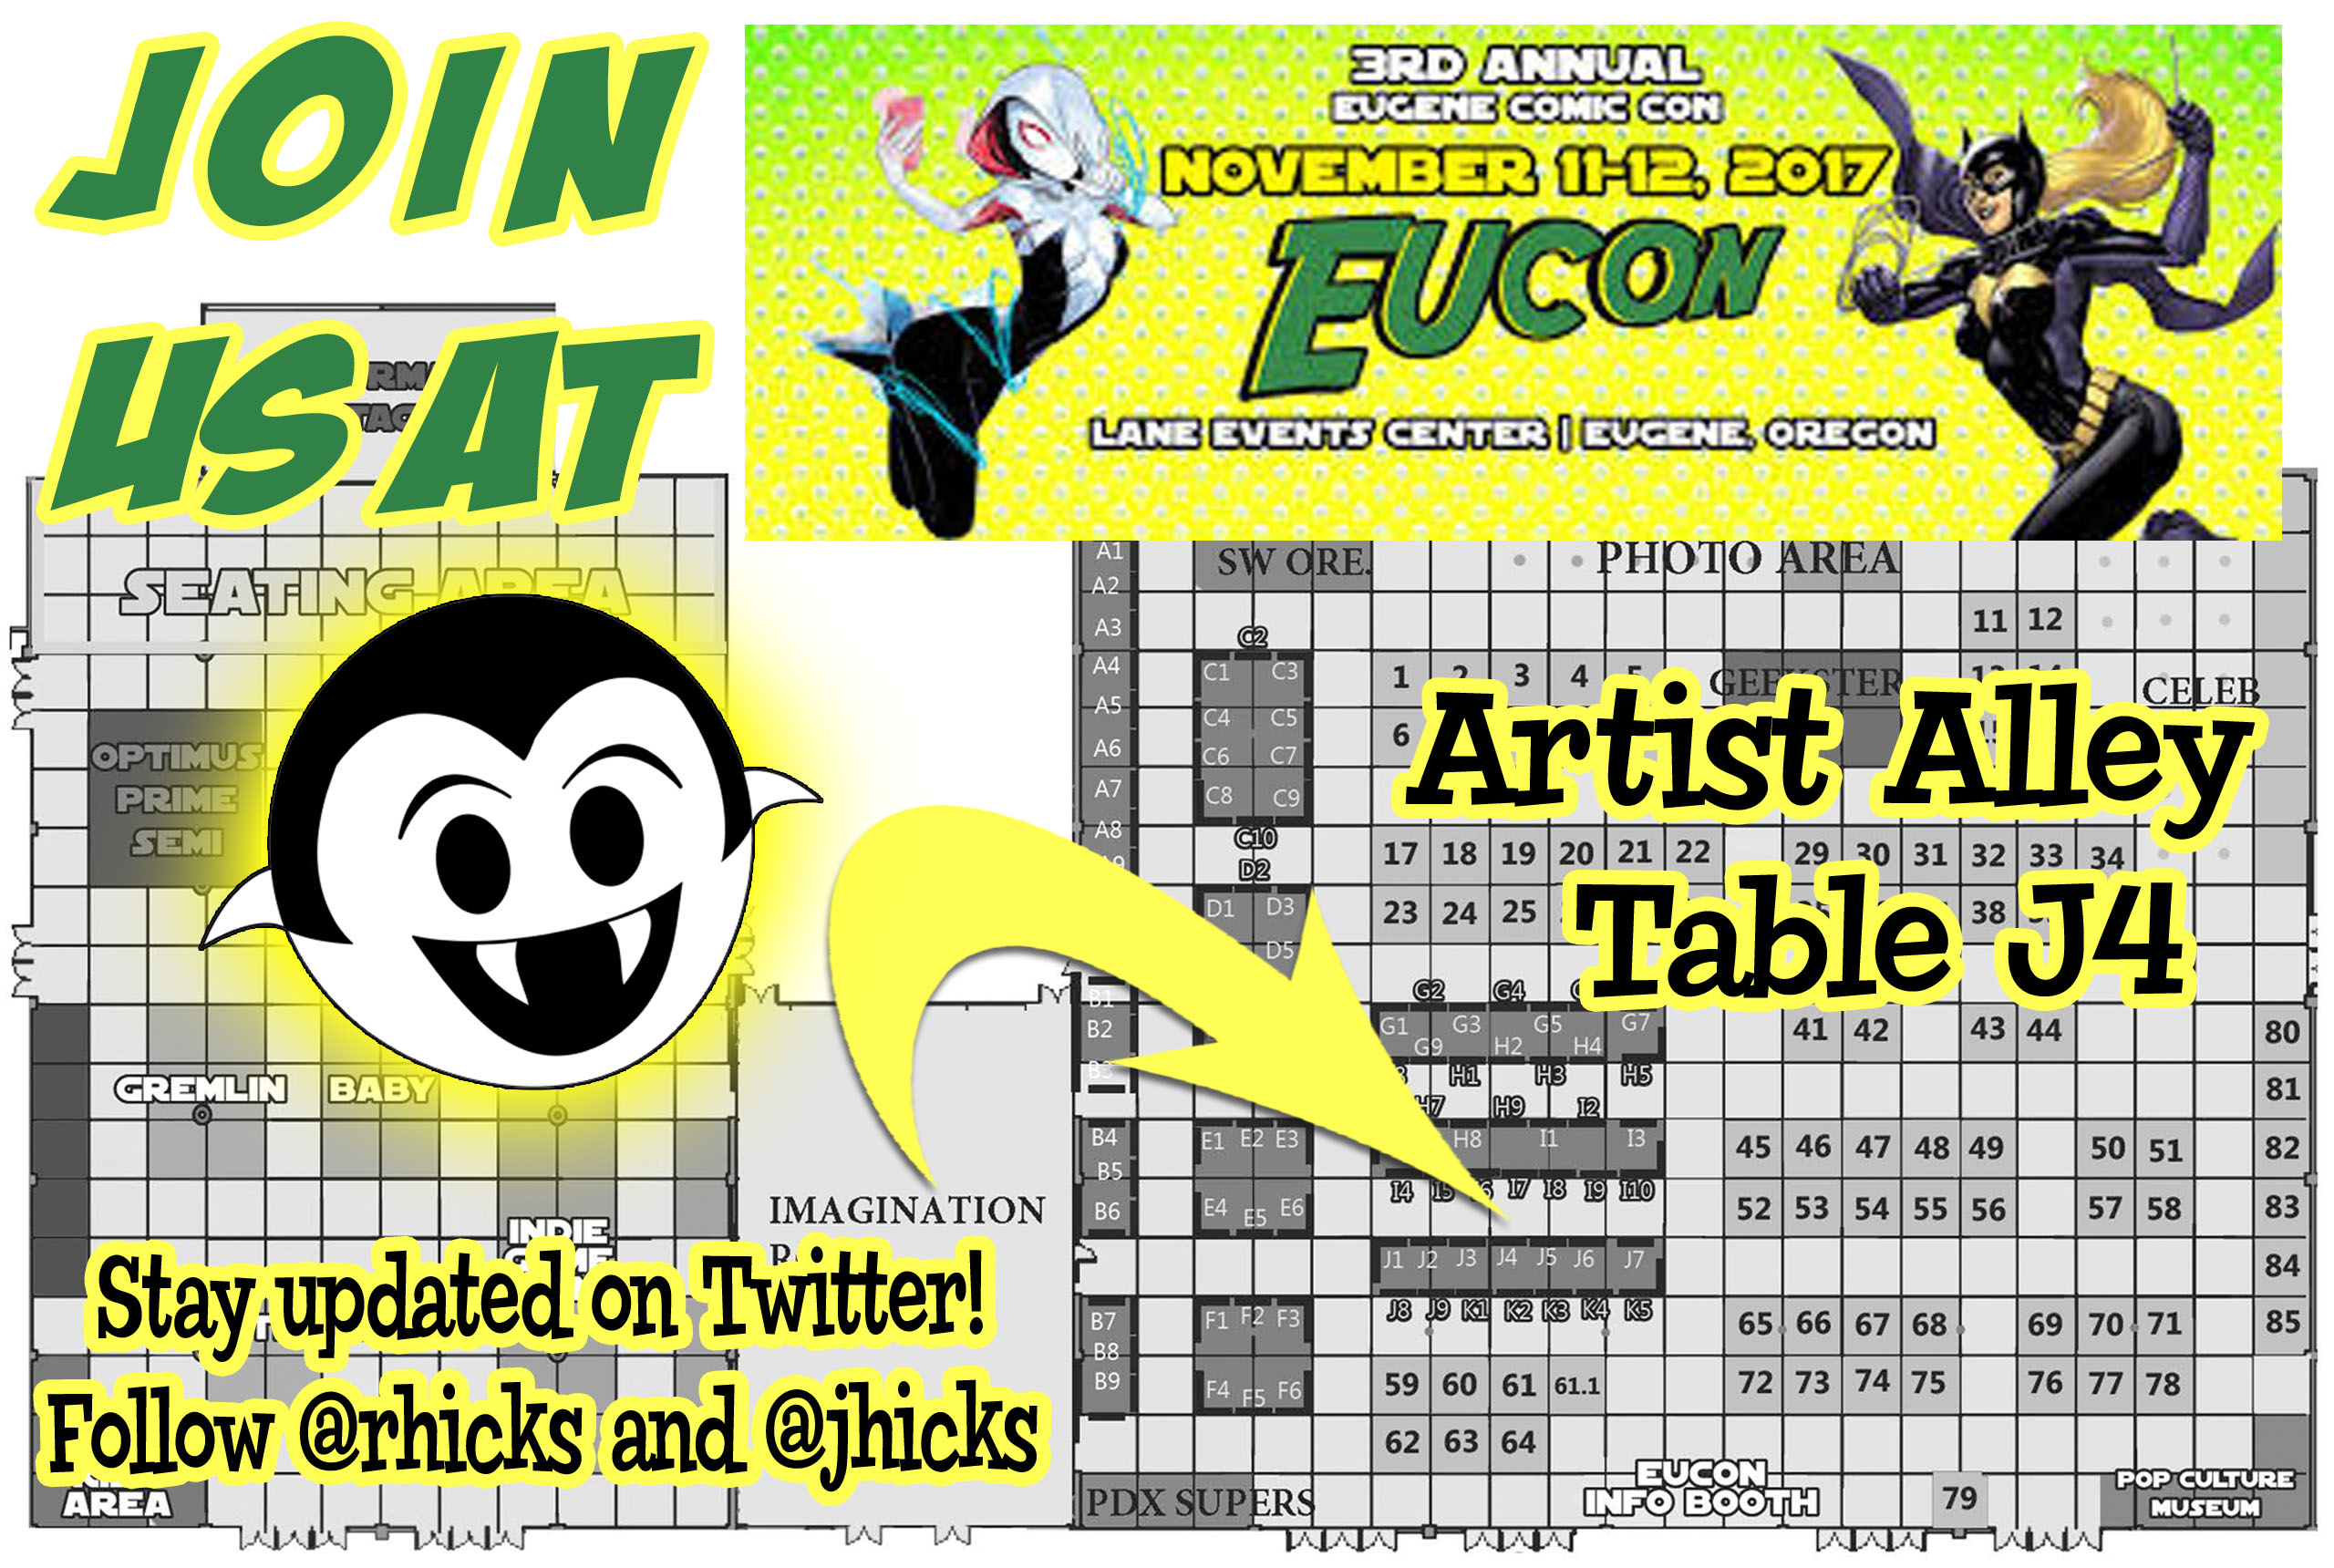 EUCON 2017 exhibitor floor map with the Little Vampires Booth highlighted